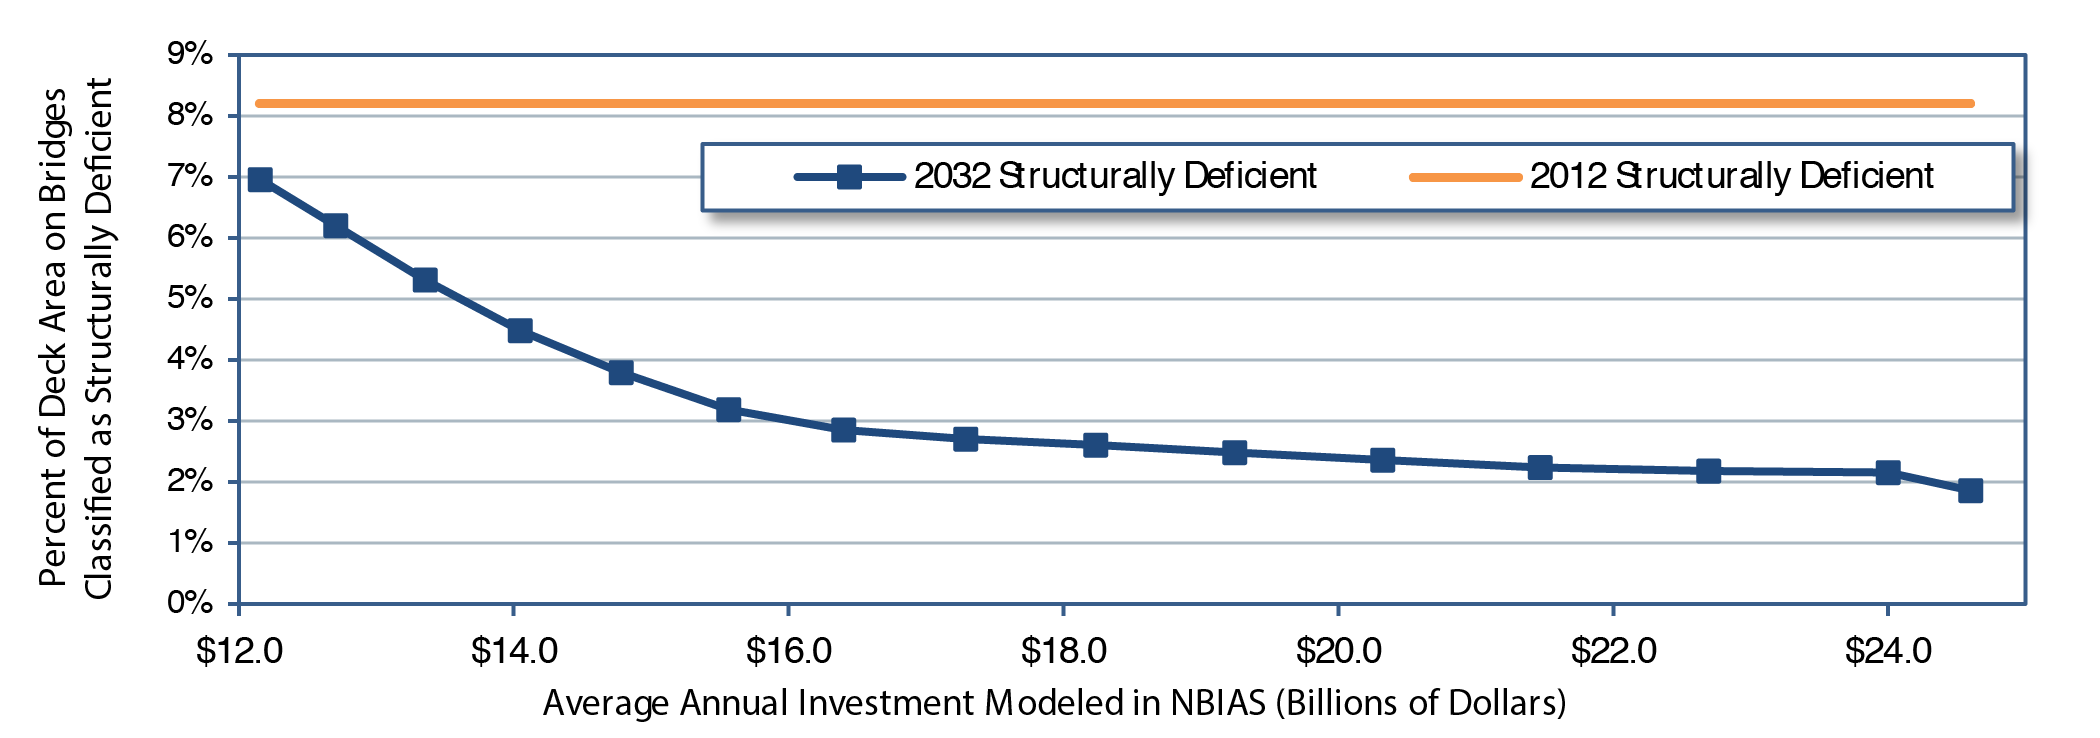 A line graph plots values for percent of deck area on bridges classified as structurally deficient over average annual investment in billions of year 2012 dollars modeled in NBIAS for 2012 and 2032. While the line for 2012 structurally deficient bridges remains slightly over 8.0 percent from $12.2 billion to $24.6 billion, the plot for 2032 structurally deficient bridges has an initial value of 7.0 percent at an annual investment of $12.2 billion and curves smoothly downward to a value of 3.8 percent at an annual investment of $14.8 billion. Continuing downward, the plot reaches a value of 2.6 percent at an annual investment of $18.2 billion, ending at a value of 1.9 percent at an annual investment of $24.6 billion. Source: National Bridge Investment Analysis System.